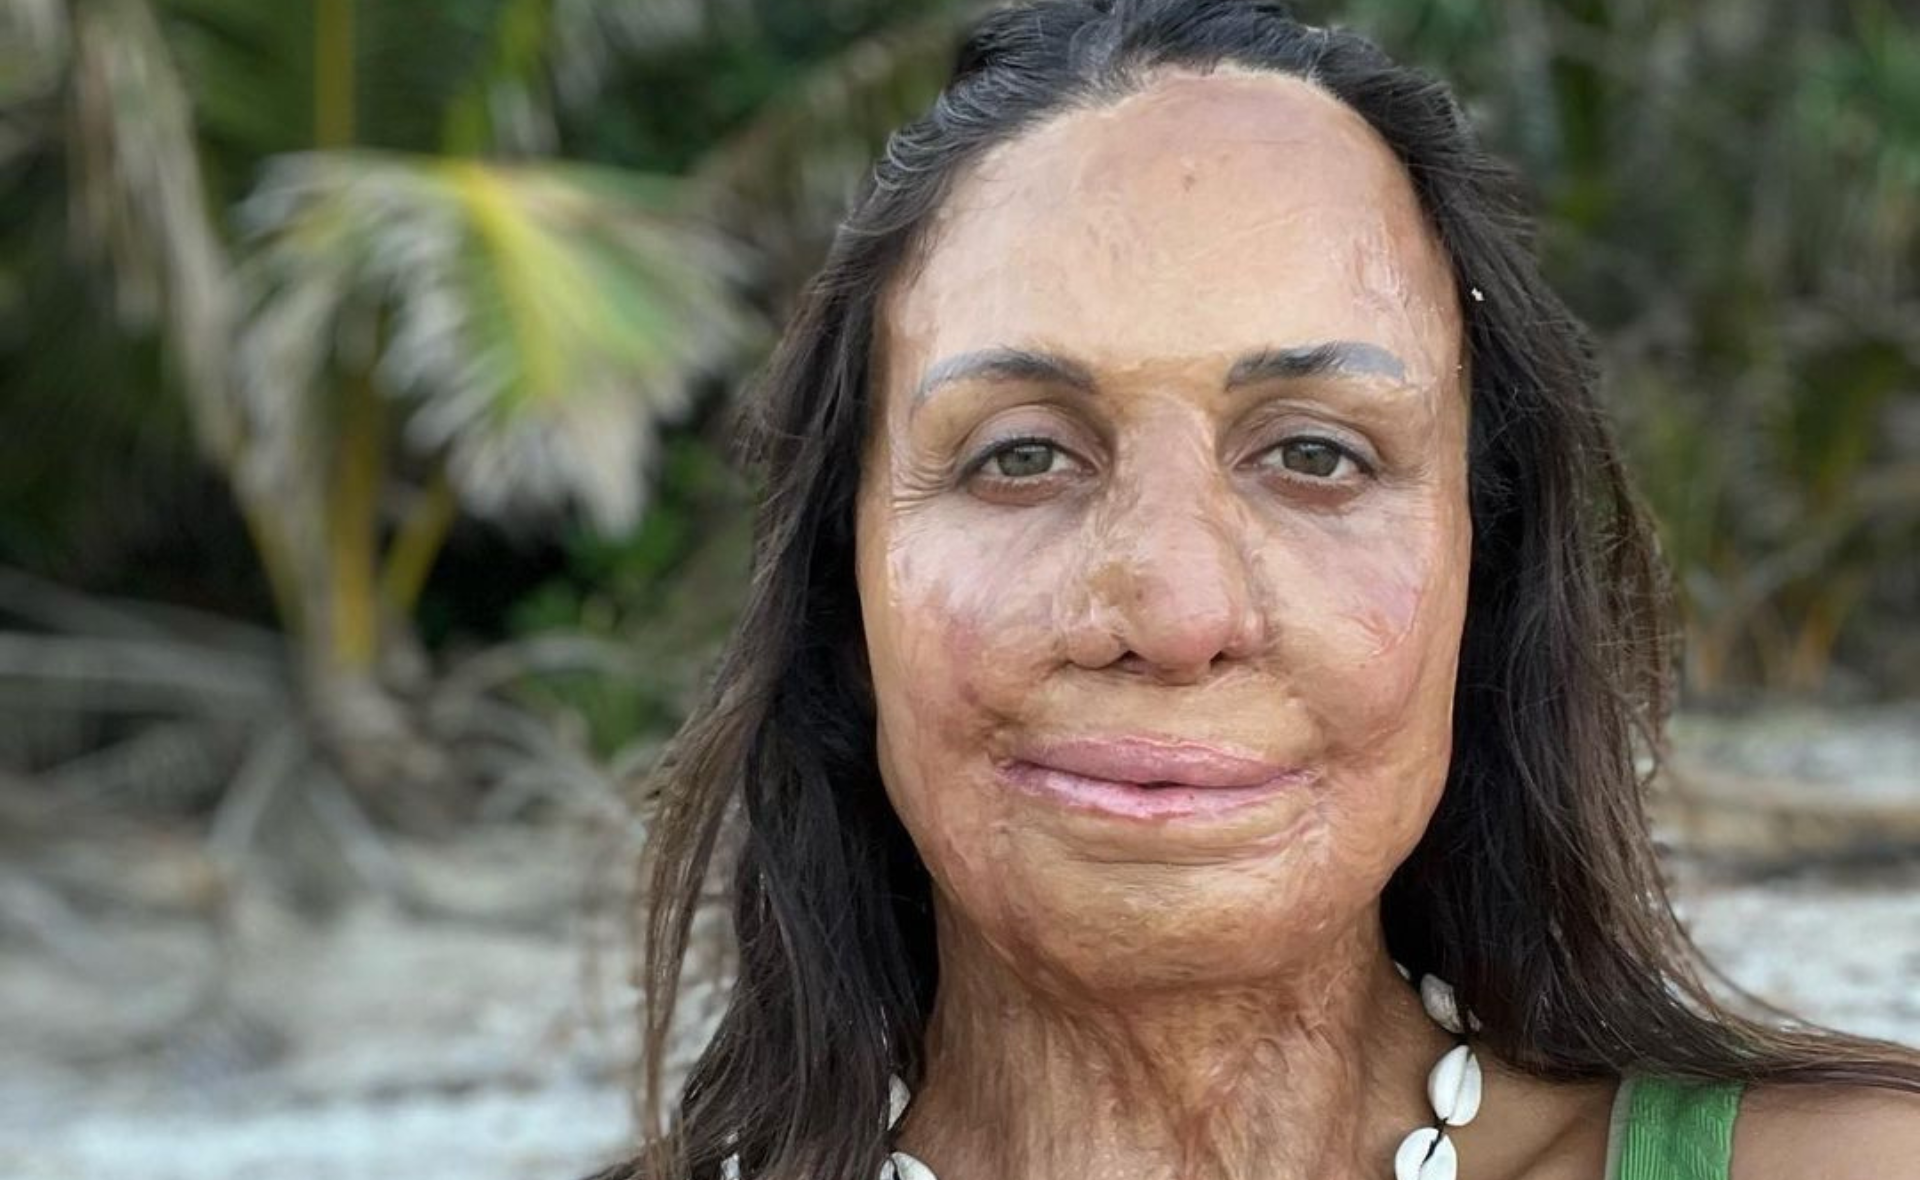 “I was setting myself up to fail”: Turia Pitt talks about motivation and accepting failure